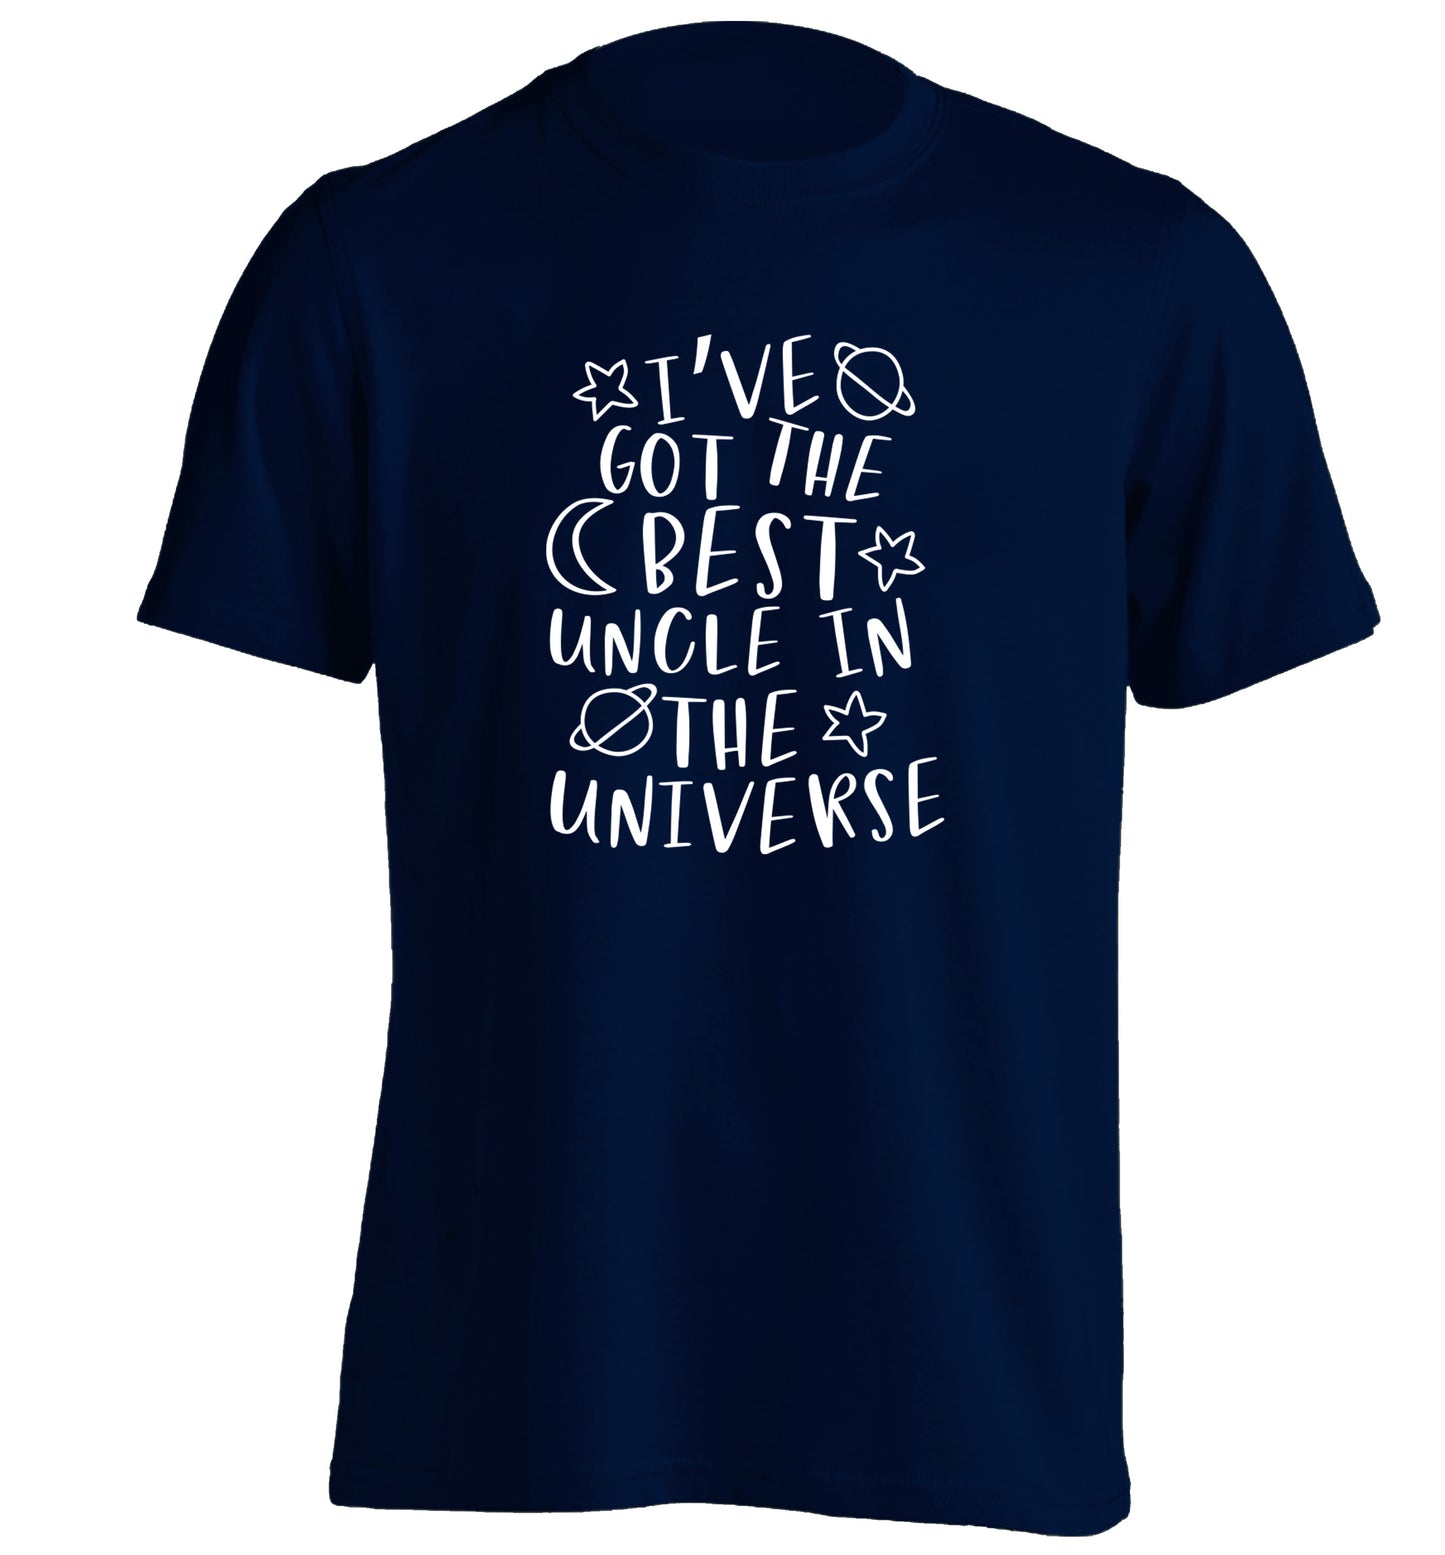 I've got the best uncle in the universe adults unisex navy Tshirt 2XL